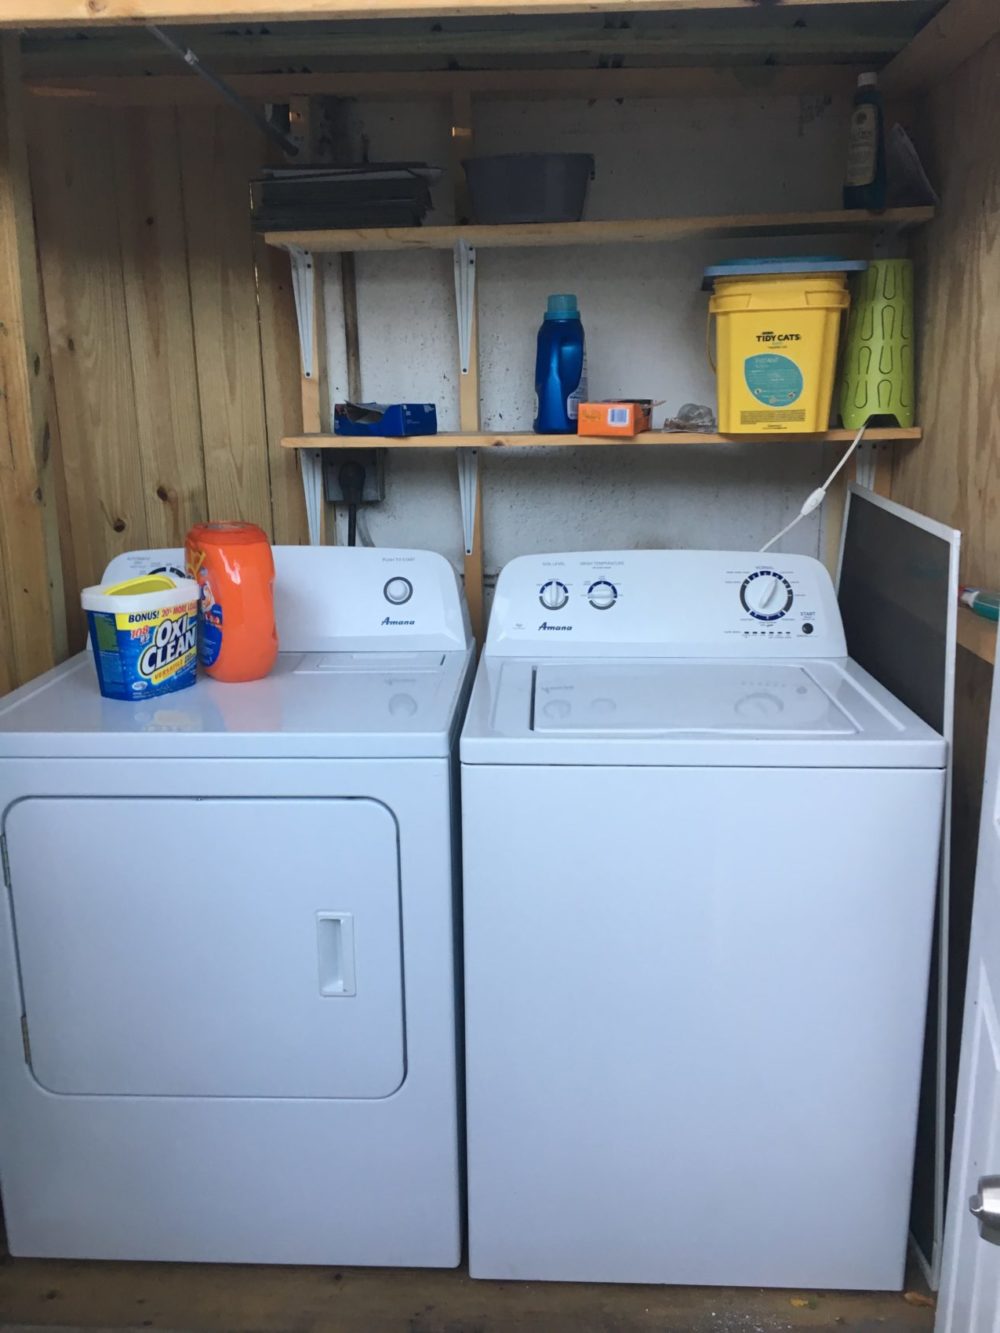 Her new washer and dryer. (Courtesy of Rittel) 